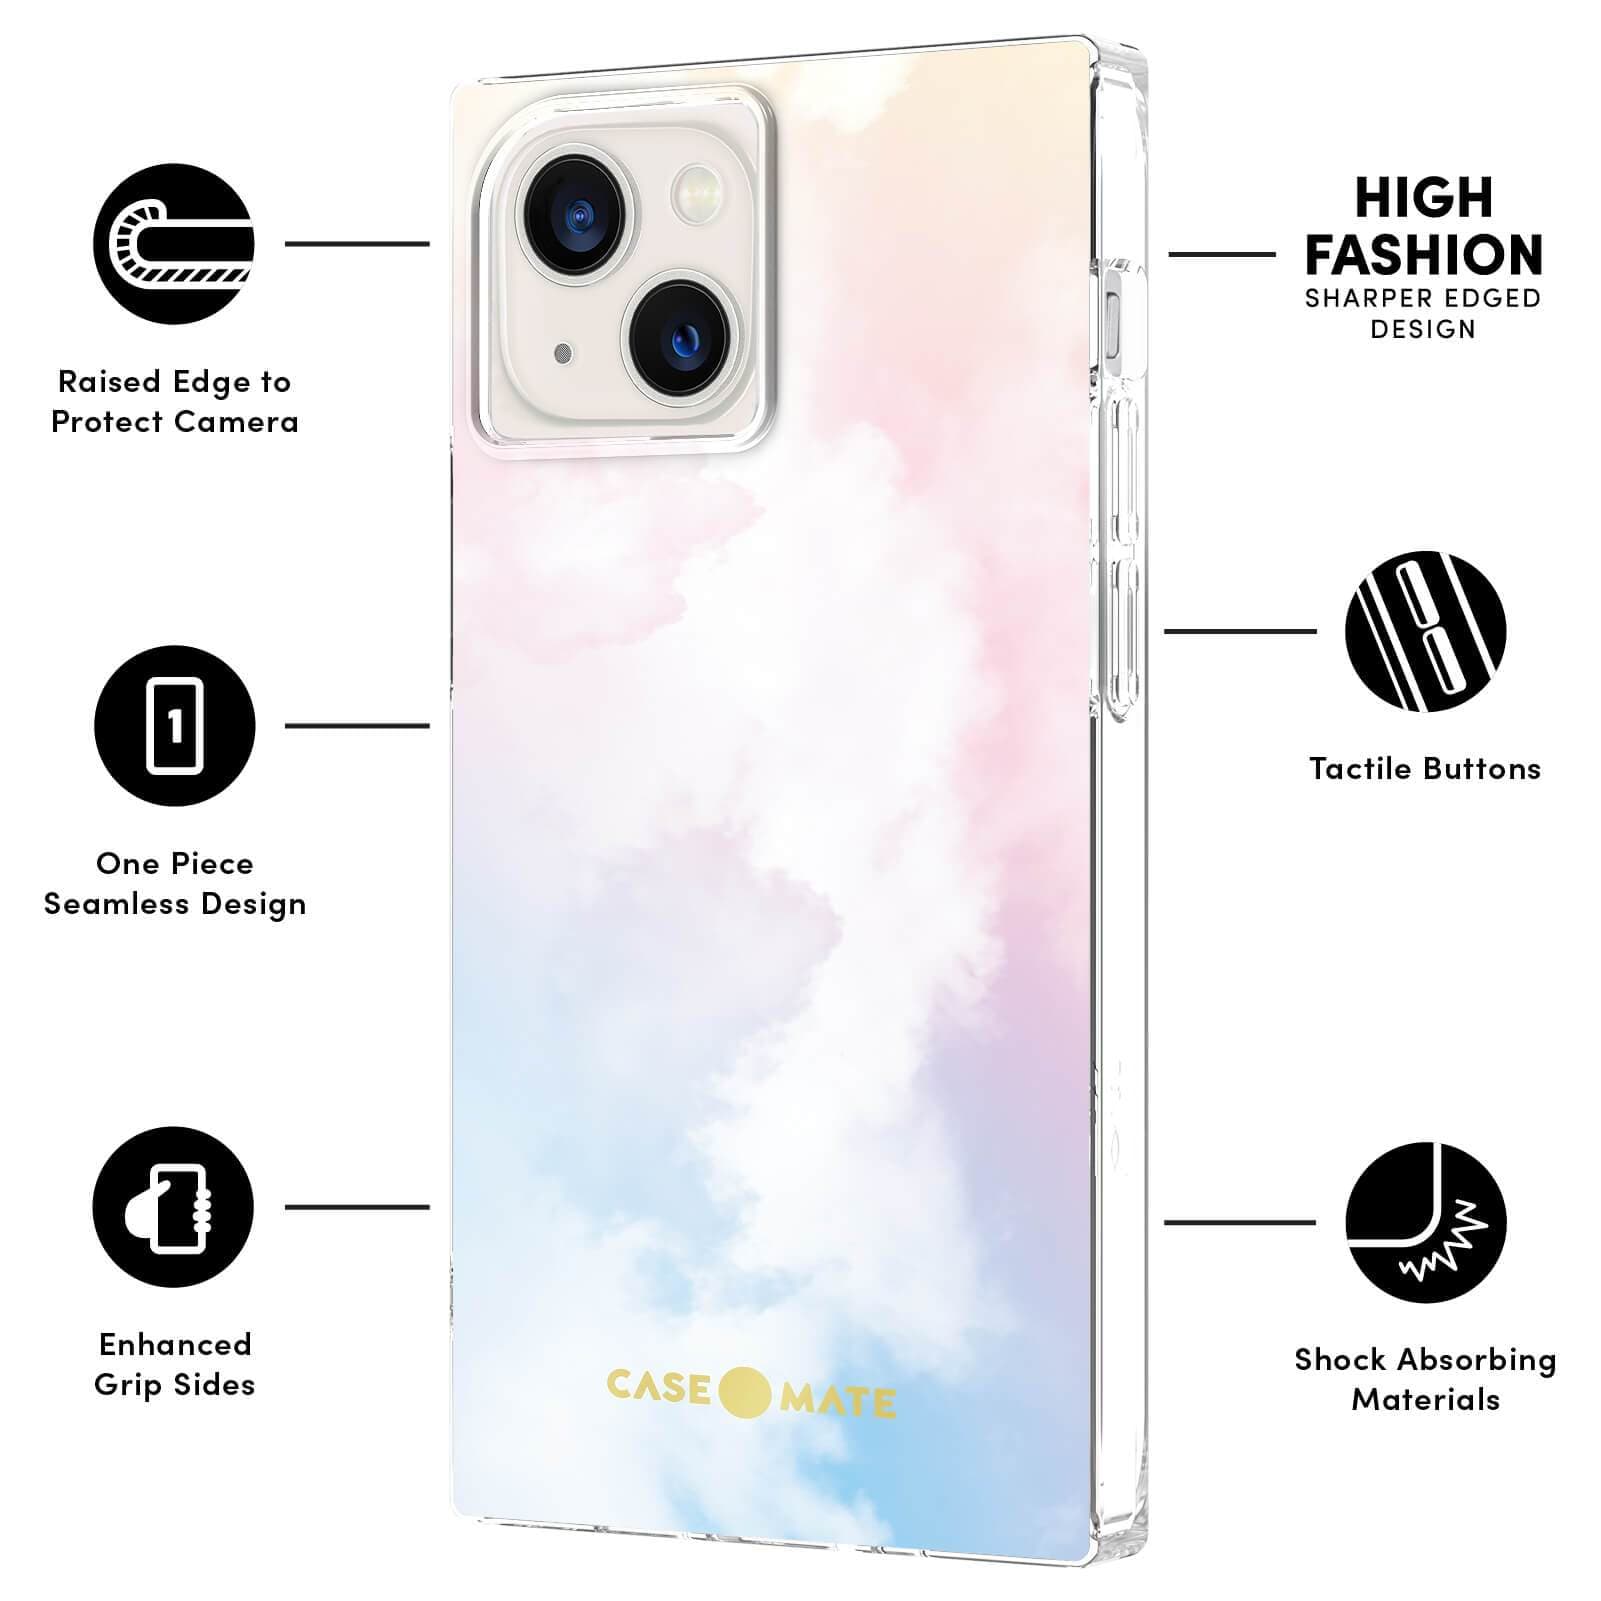 FEATURES: RAISED EDGE TO PROTECT CAMERA, ONE PIECE SEAMLESS DESIGN, ENHANCED GRIP SIDES, HIGH FASHION SHARPER EDGED DESIGN, TACTILE BUTTONS, SHOCK ABSORBING MATERIALS. COLOR::CLOUD 9